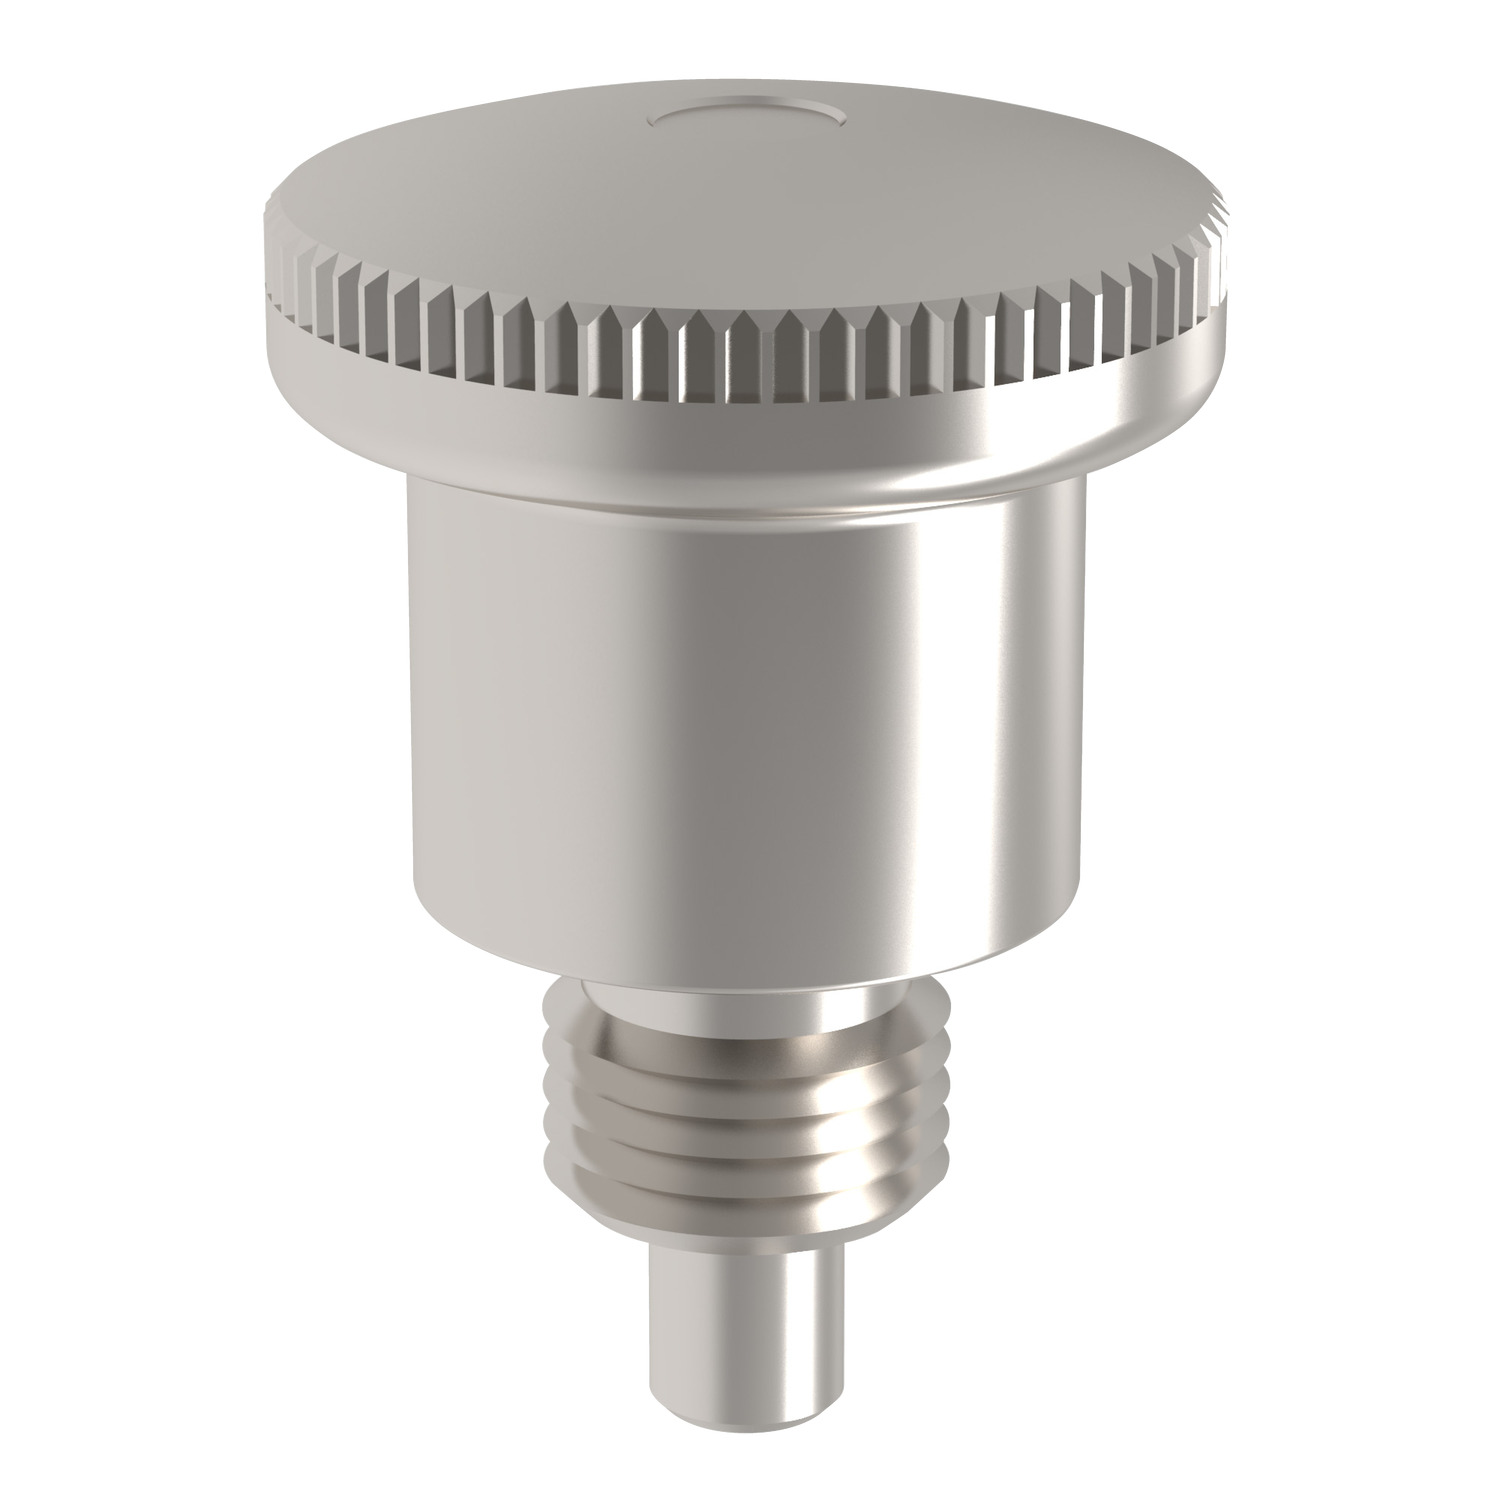 Index Plungers - Pull Grip For applications demanding only fully stainless steel components such as food/drink and pharmaceuticals. Locking and non-locking versions available.